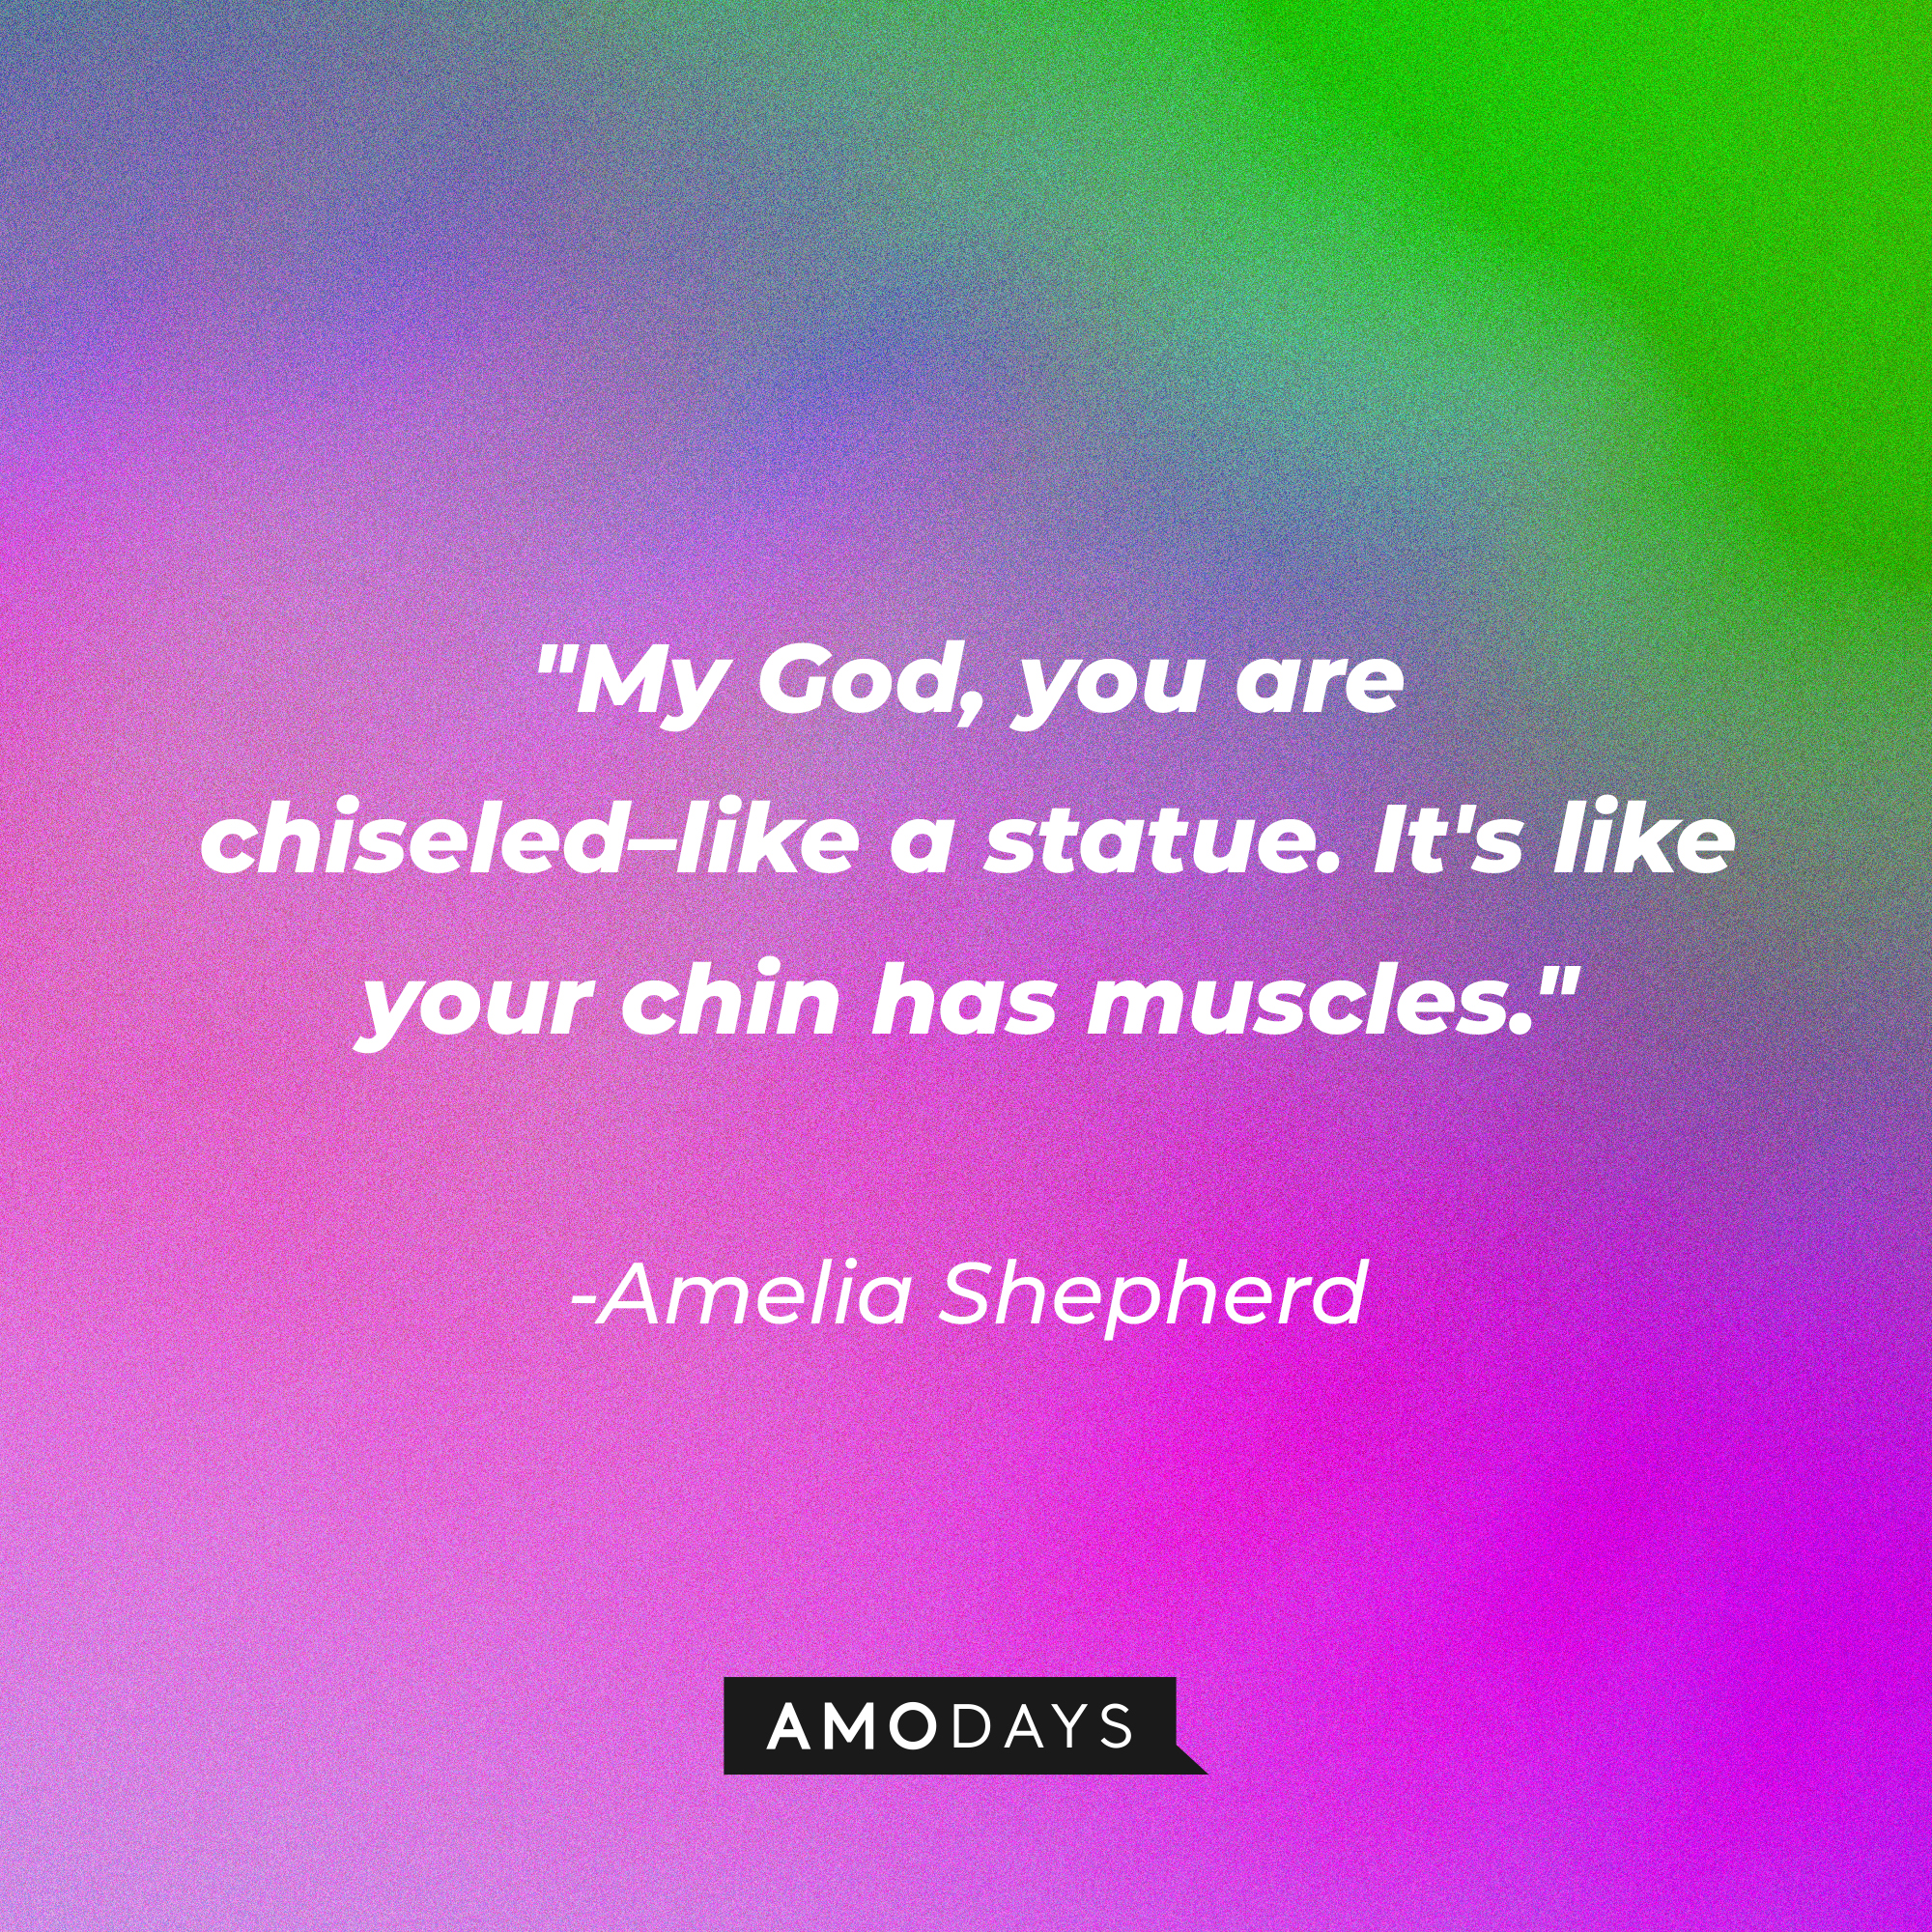 Amelia Shepherd's quote: "My God, you are chiseled–like a statue. It's like your chin has muscles." | Source: AmoDays